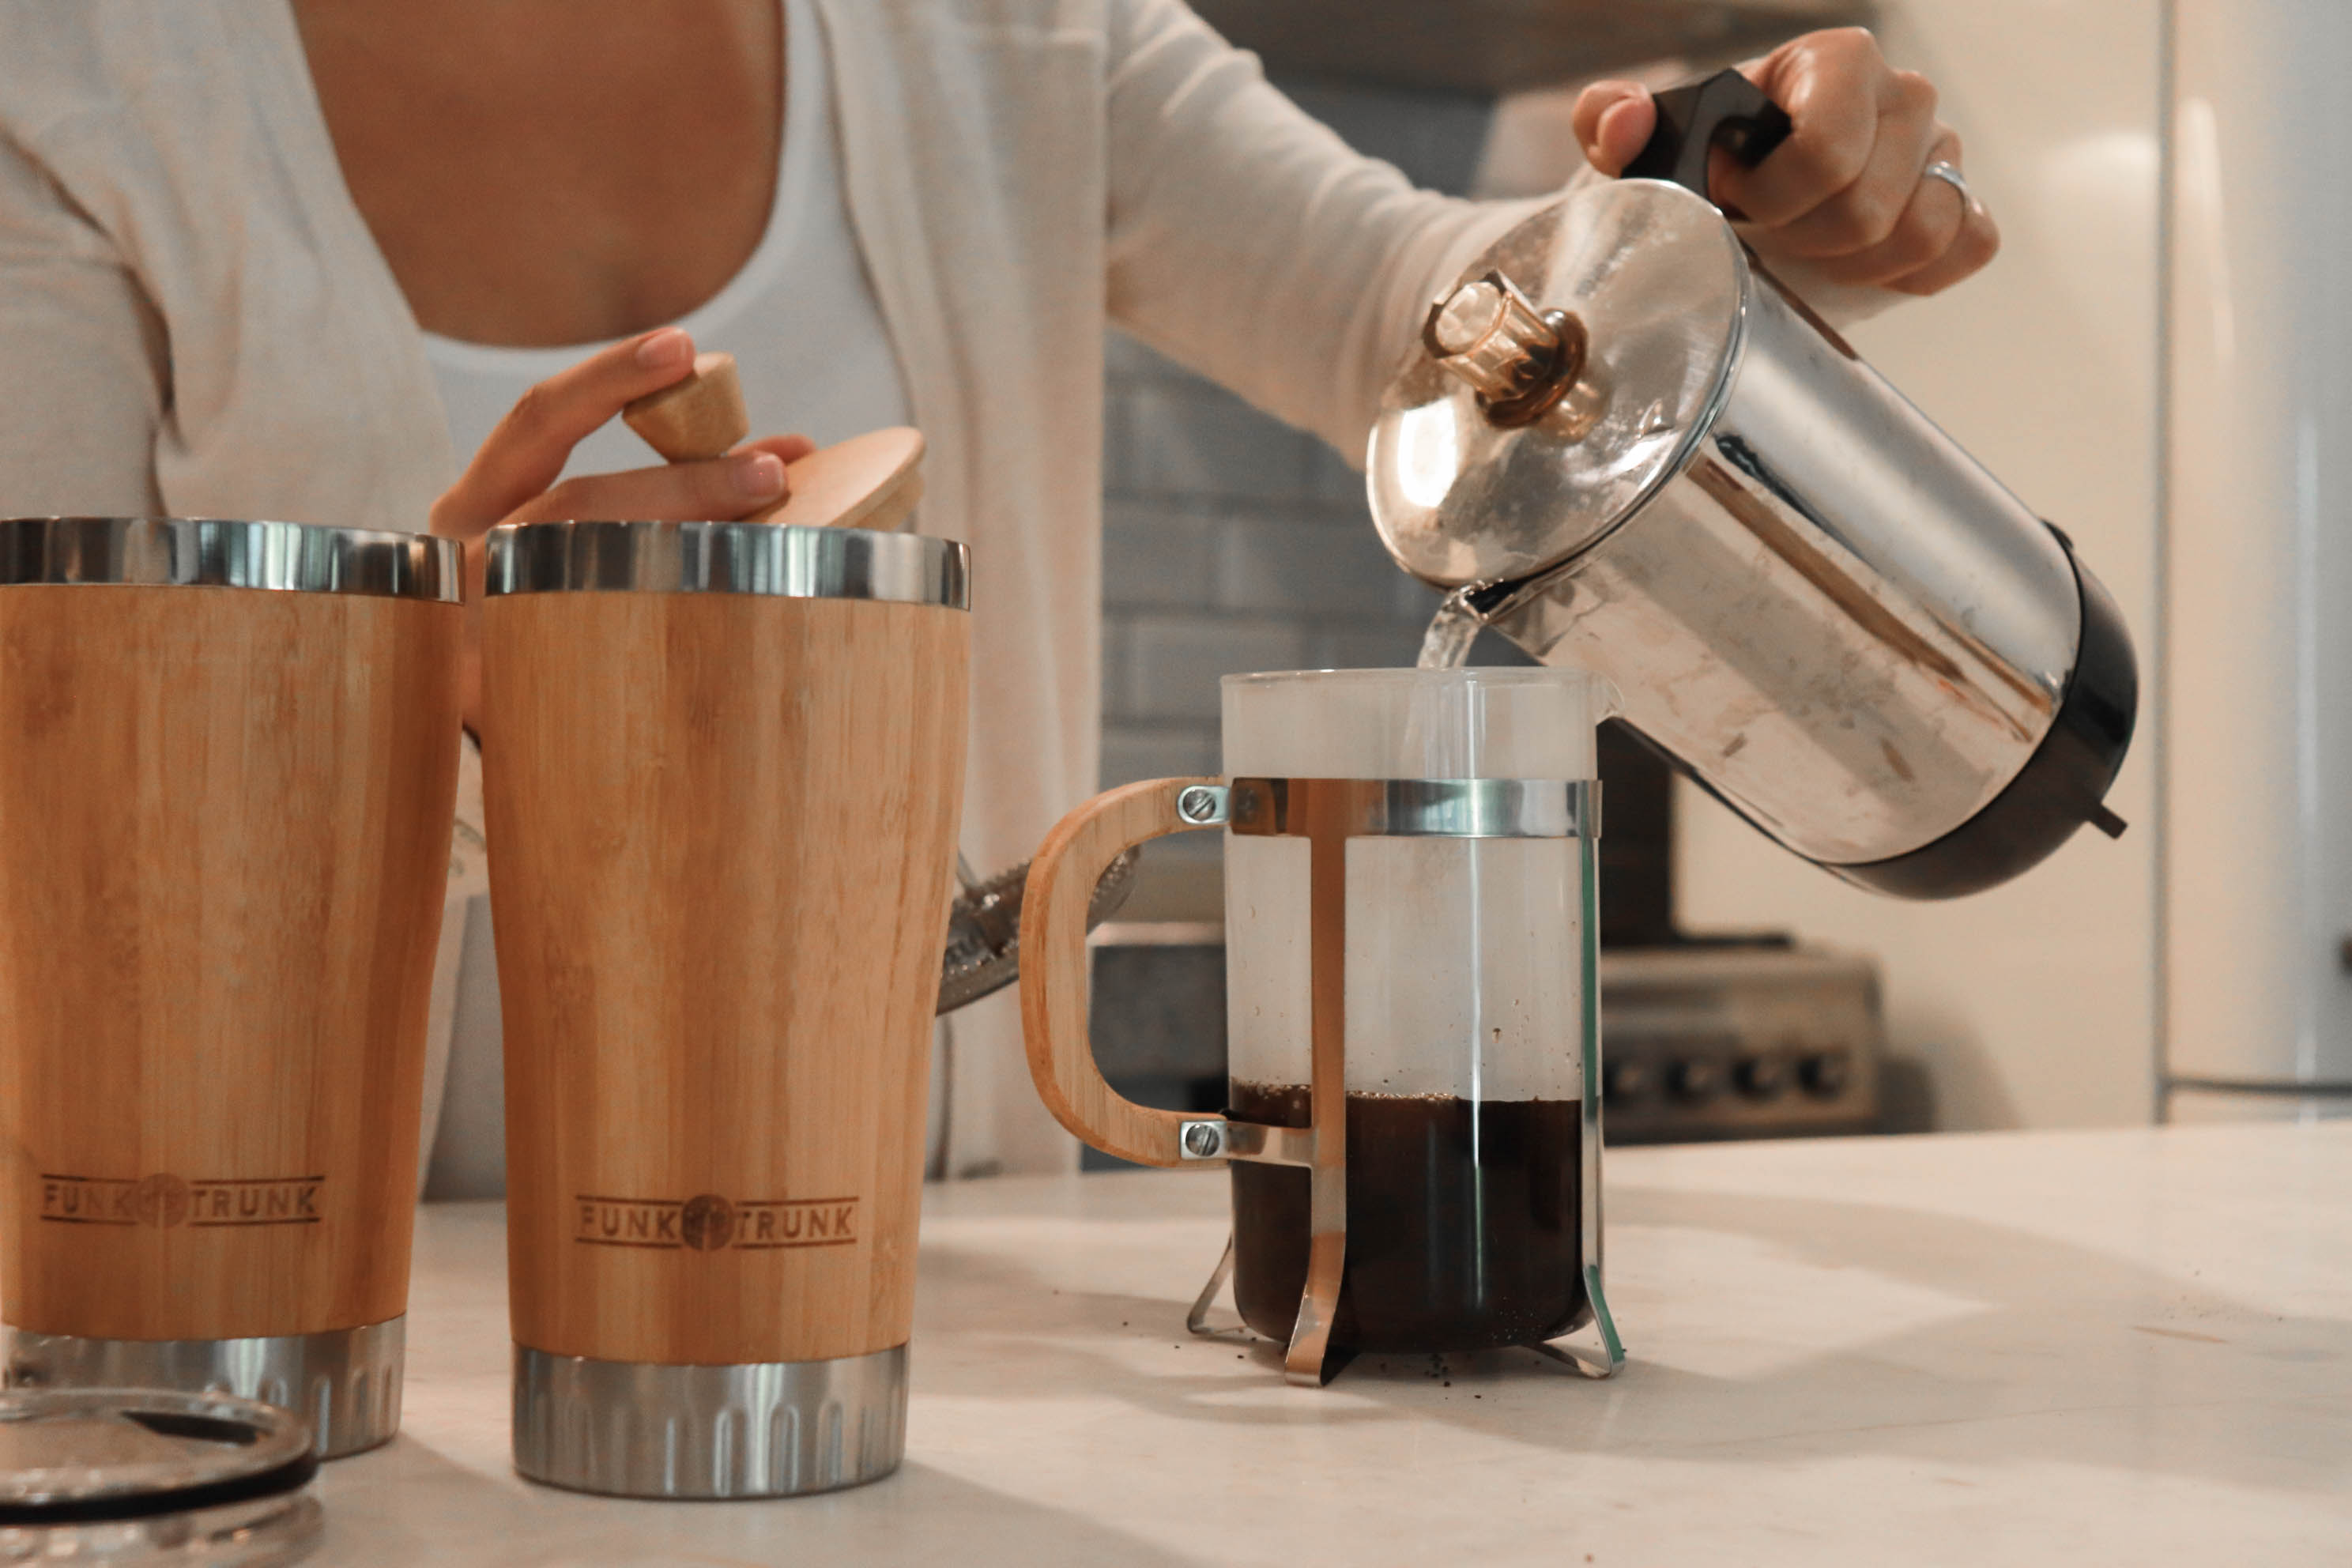 Pouring hot water to your Funk Trunk Bamboo French Press to start your day